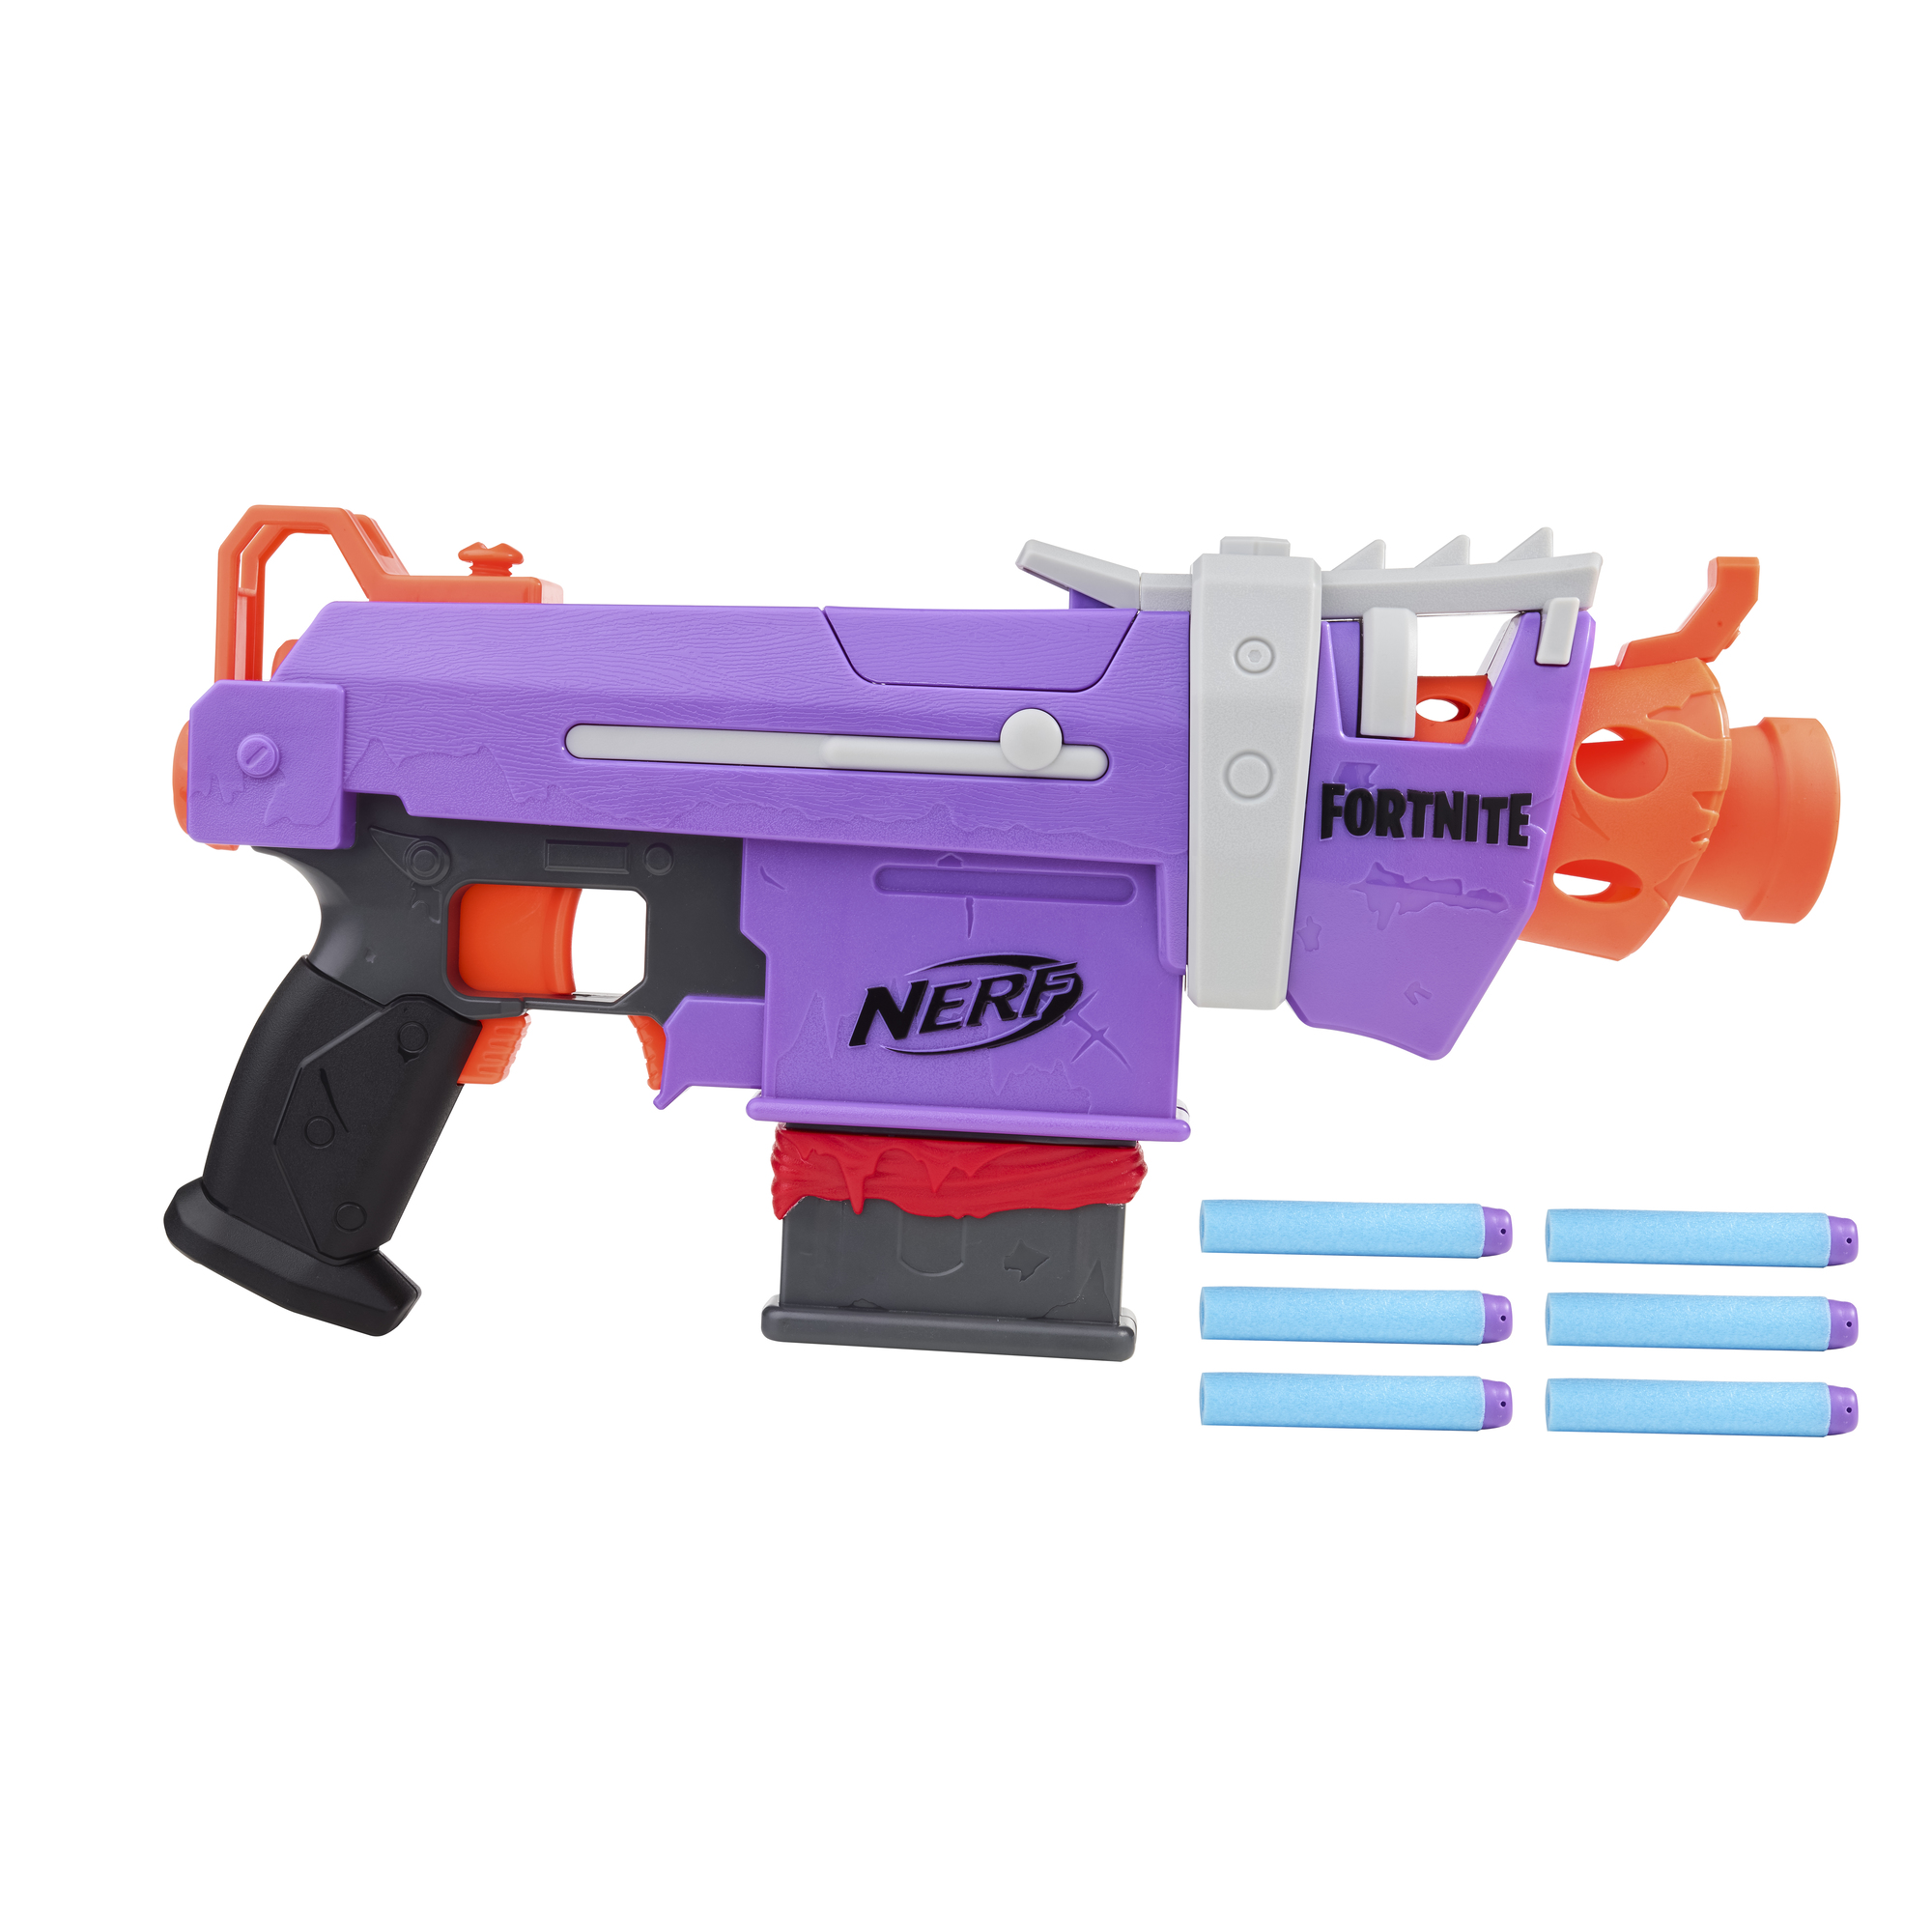 Nerf Fortnite SMG-E Motorized Blaster w/ 6 Darts $15 + free shipping w/ Walmart+ or on orders over $35